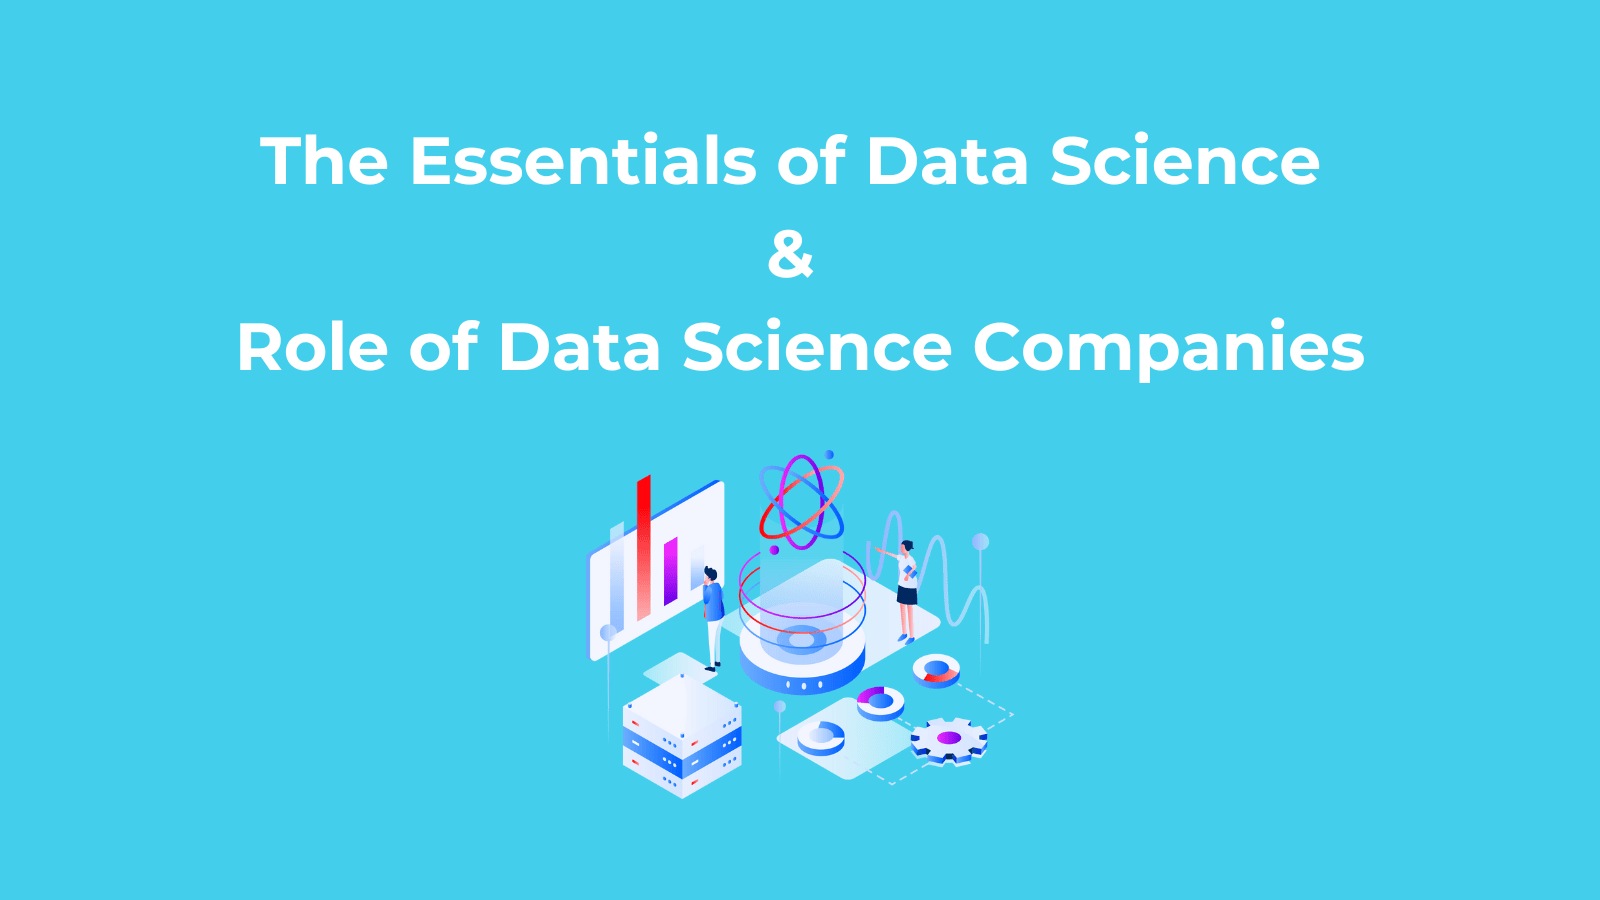 The Essentials of Data Science and Role of Data Science Companies